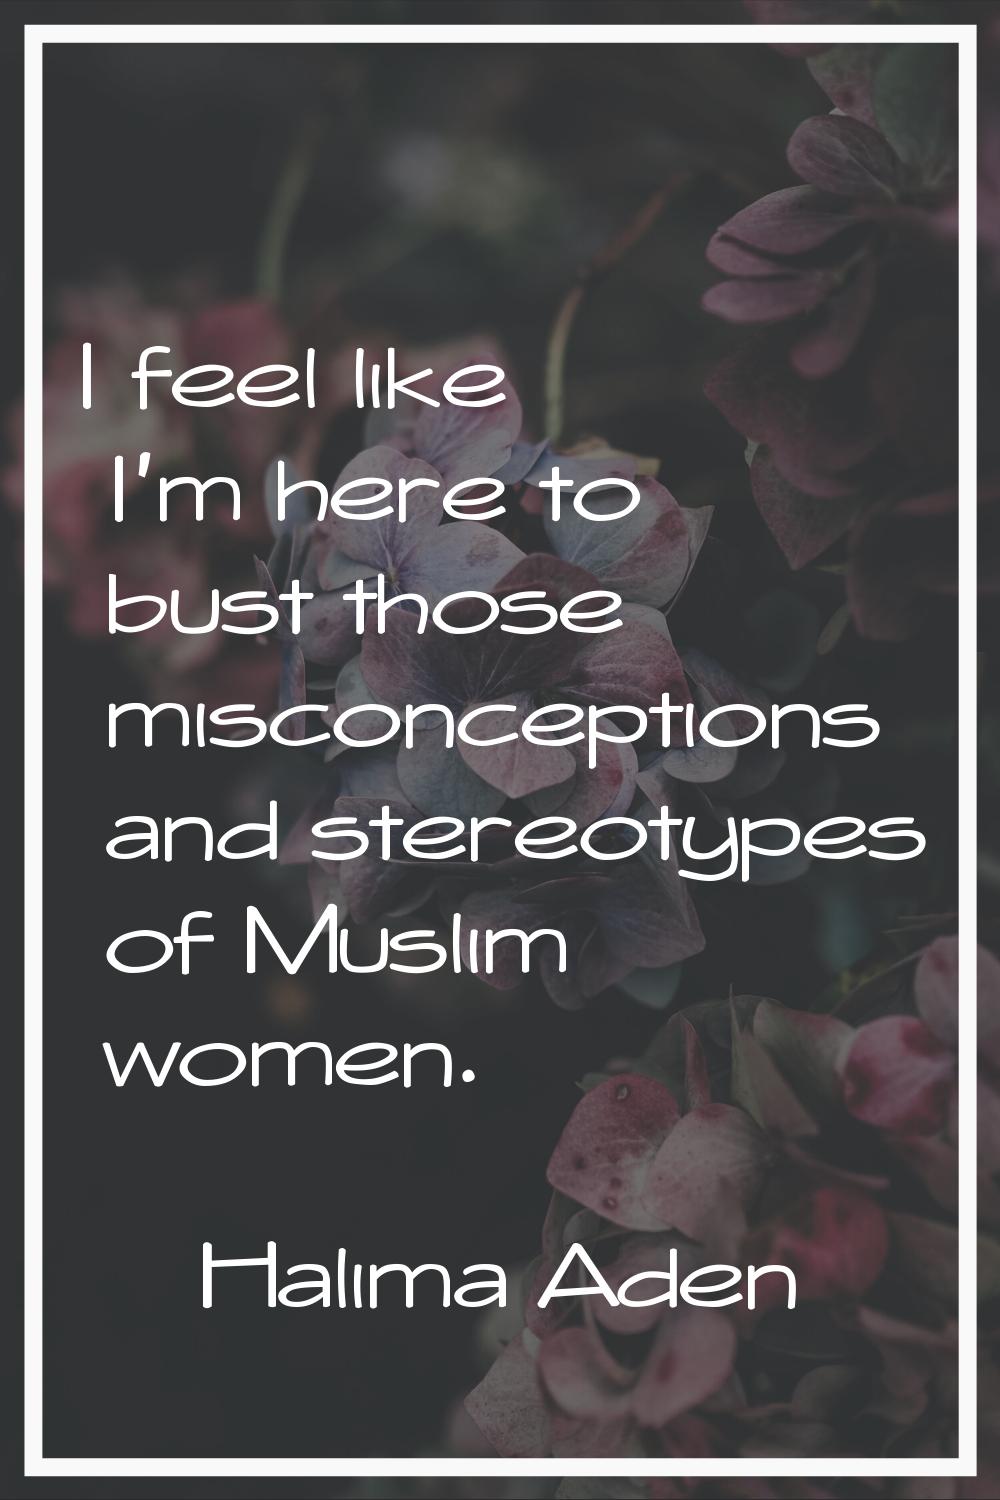 I feel like I'm here to bust those misconceptions and stereotypes of Muslim women.